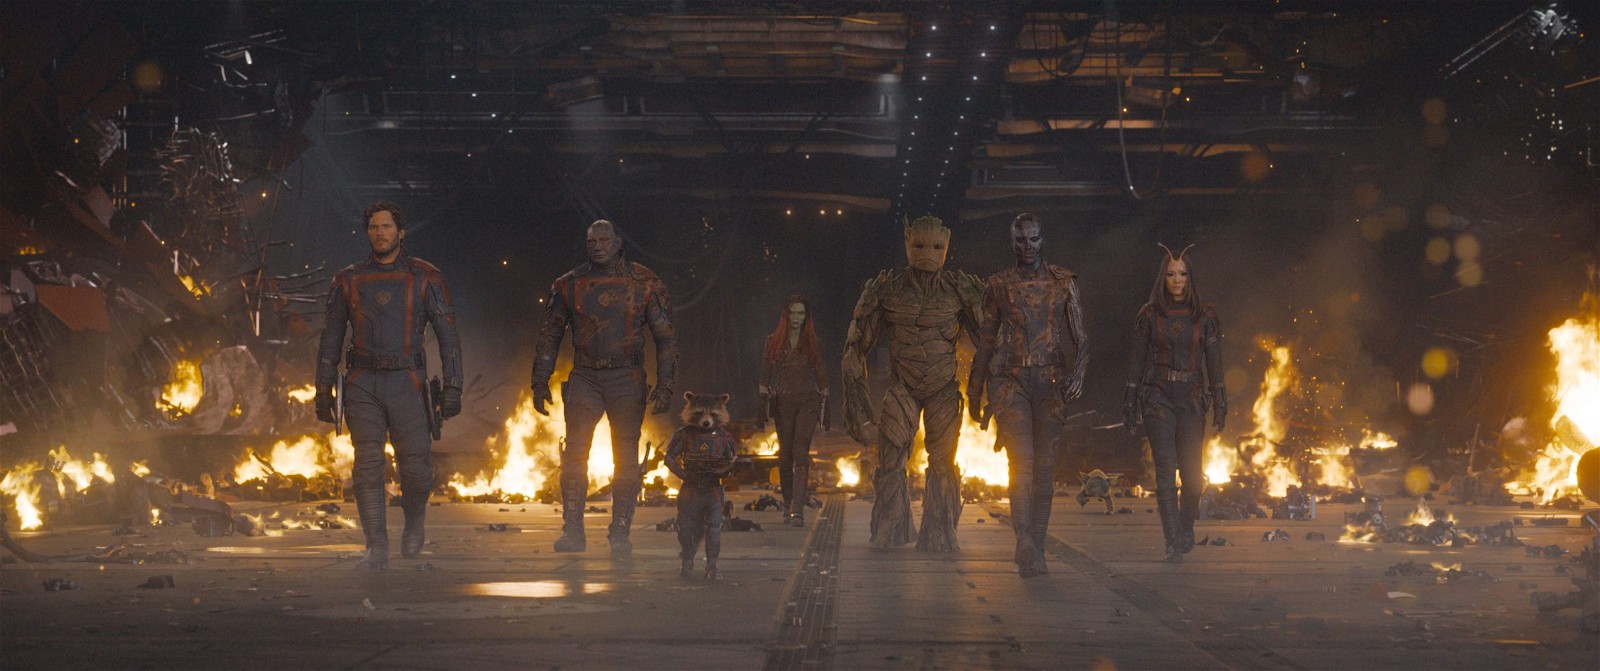 A still from Guardians Of The Galaxy